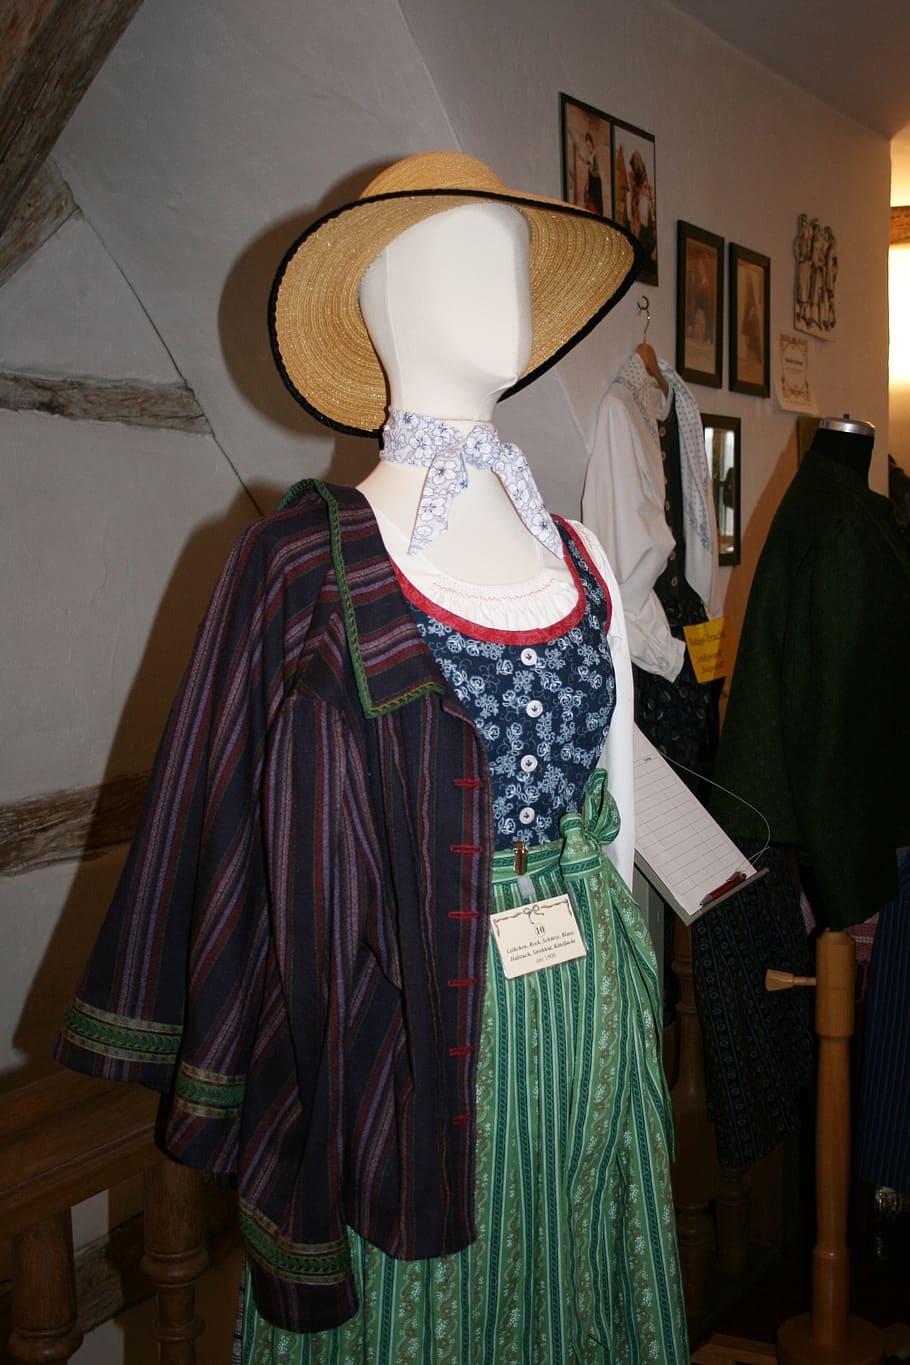 costume, dirndl, clothing, tradition, bavarian, colorful, hat, straw hat, coneflower, jacket